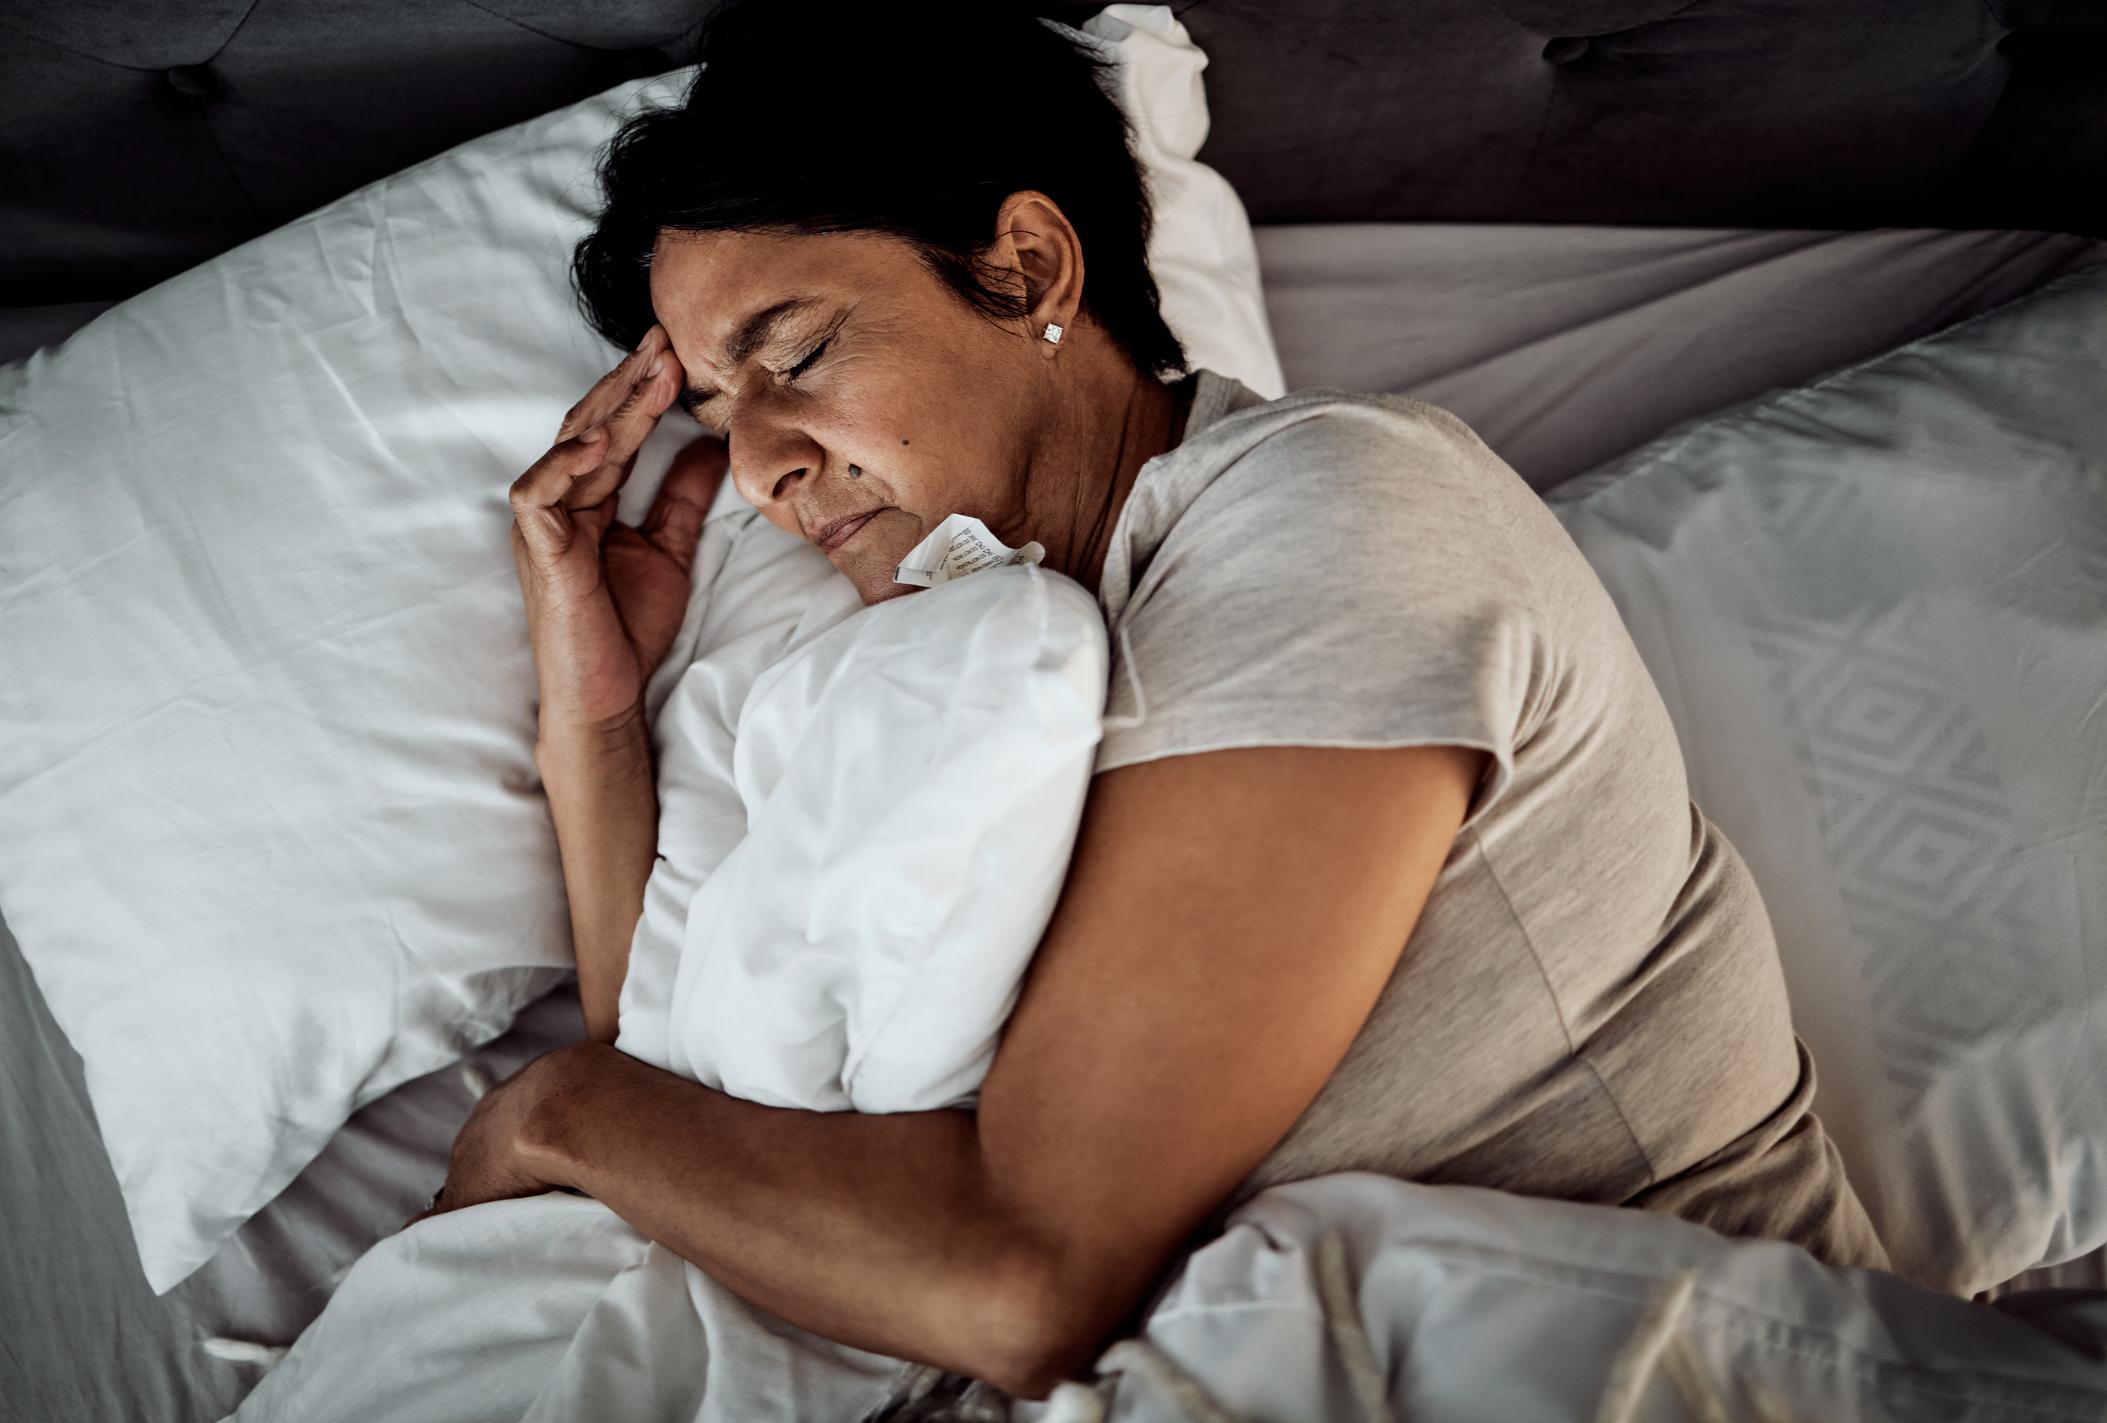 Sleeping may not ultimately be the best way to eliminate toxins from the brain.